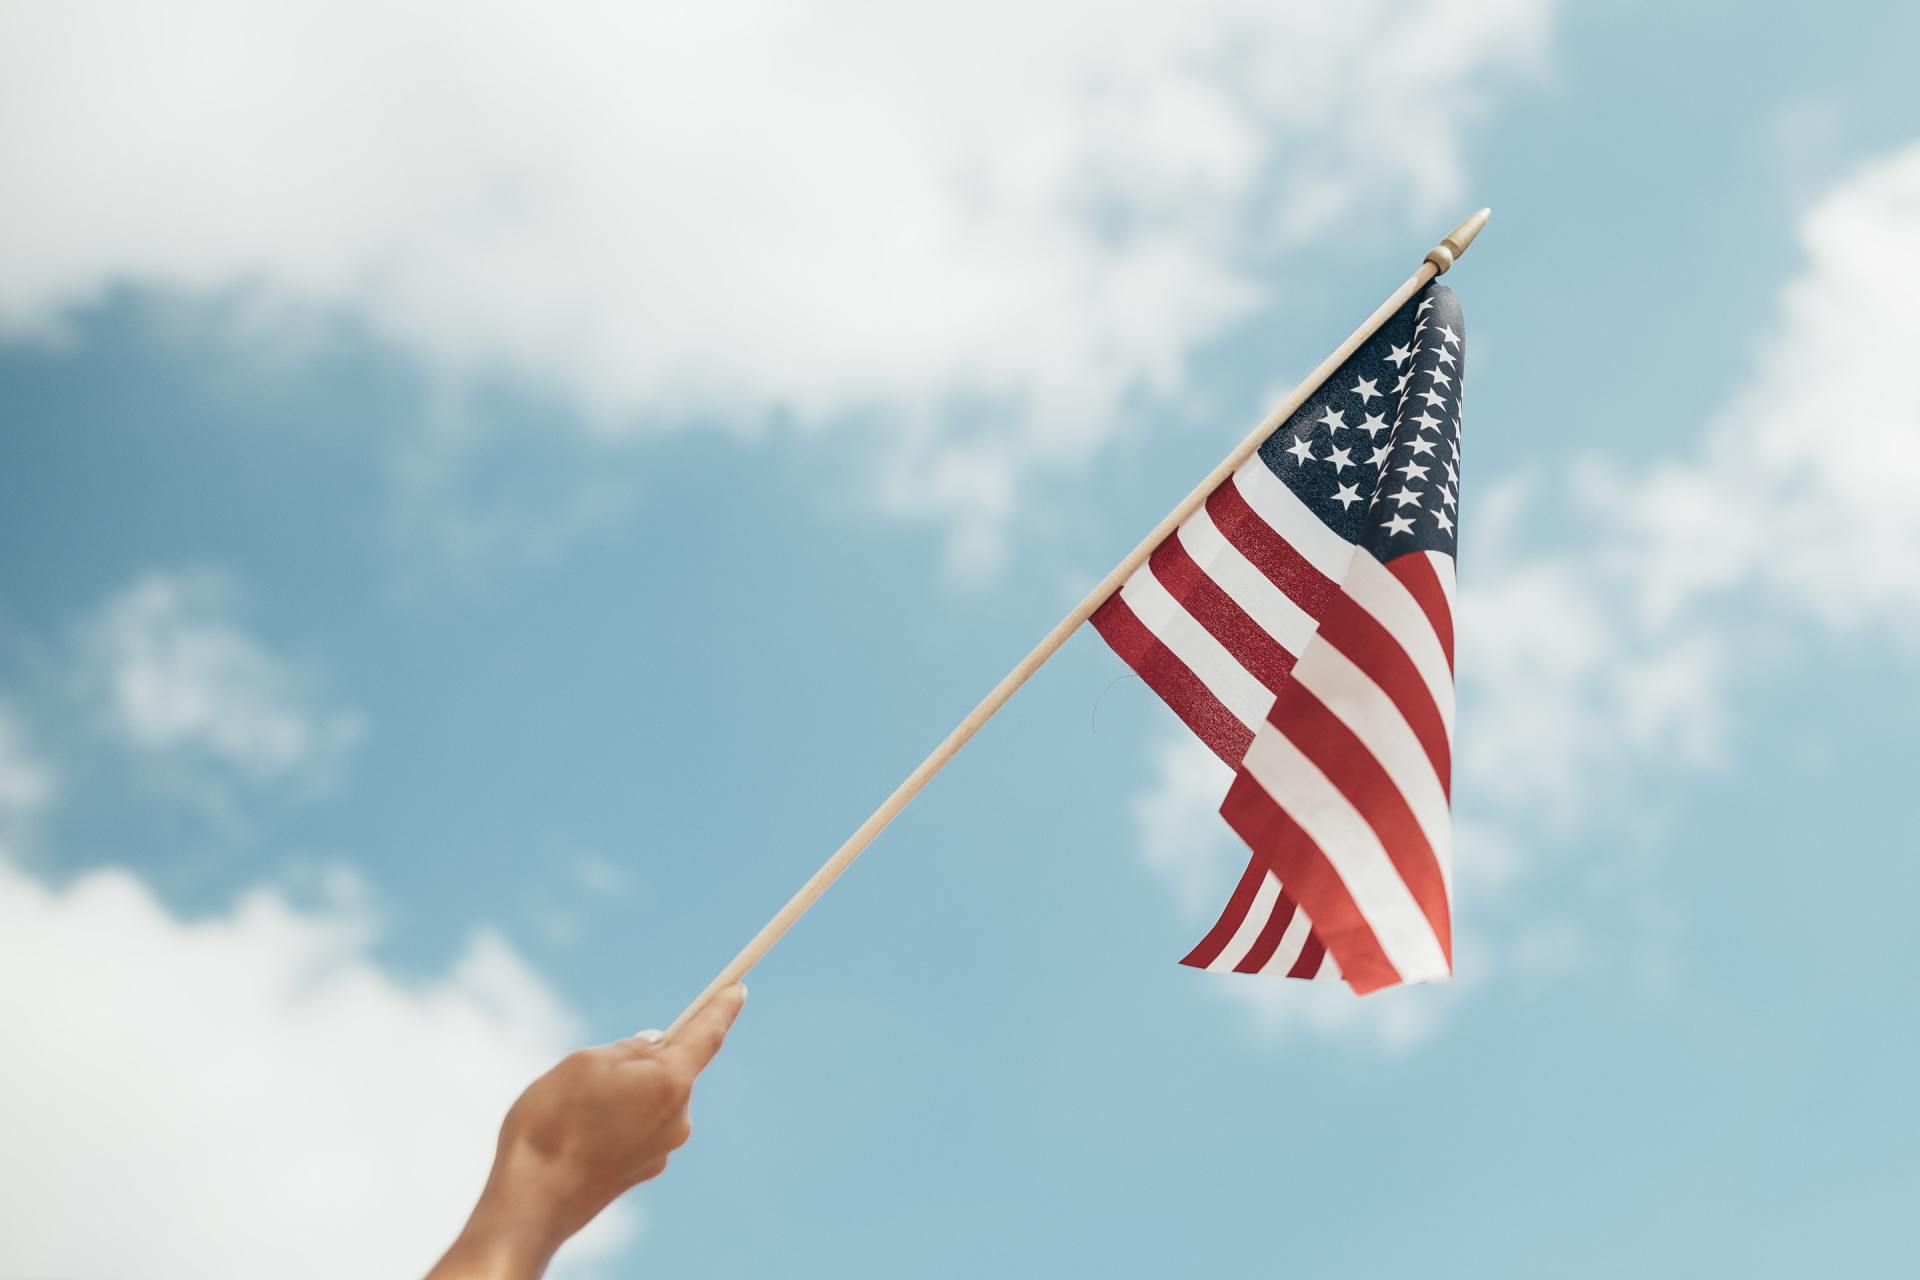 A person is holding an american flag in front of a blue sky